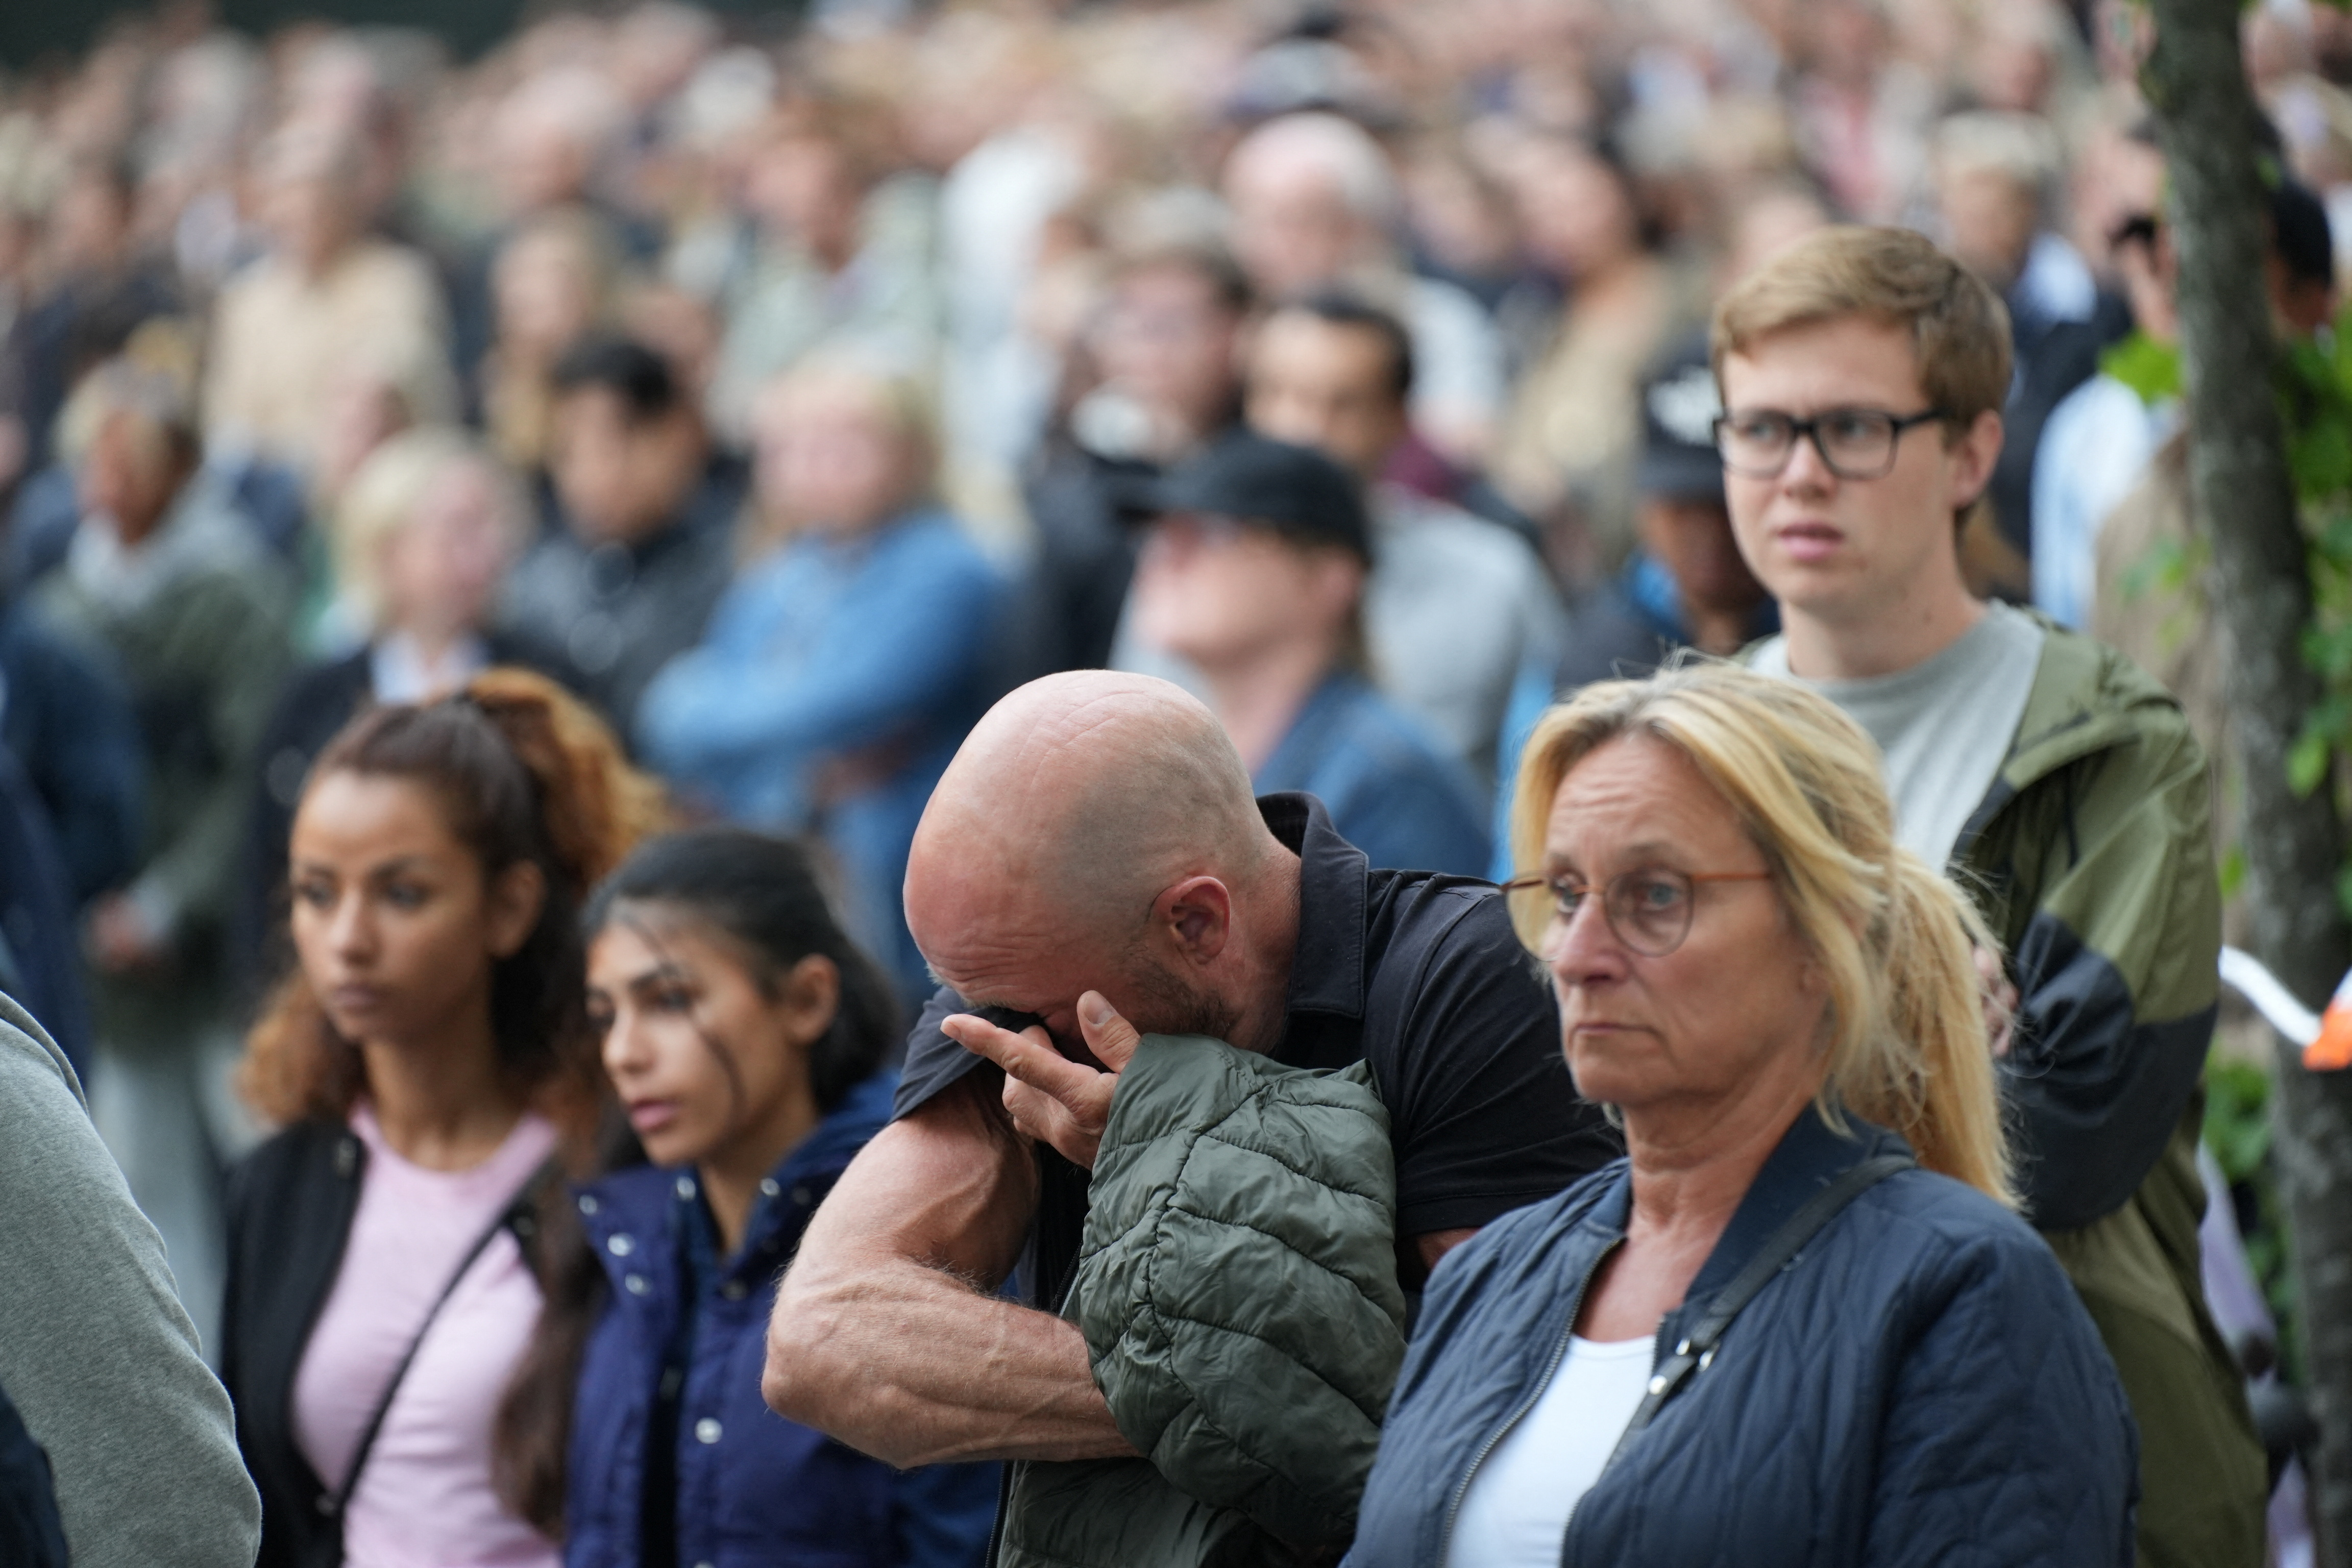 Memorial service for victims of shooting at shopping center